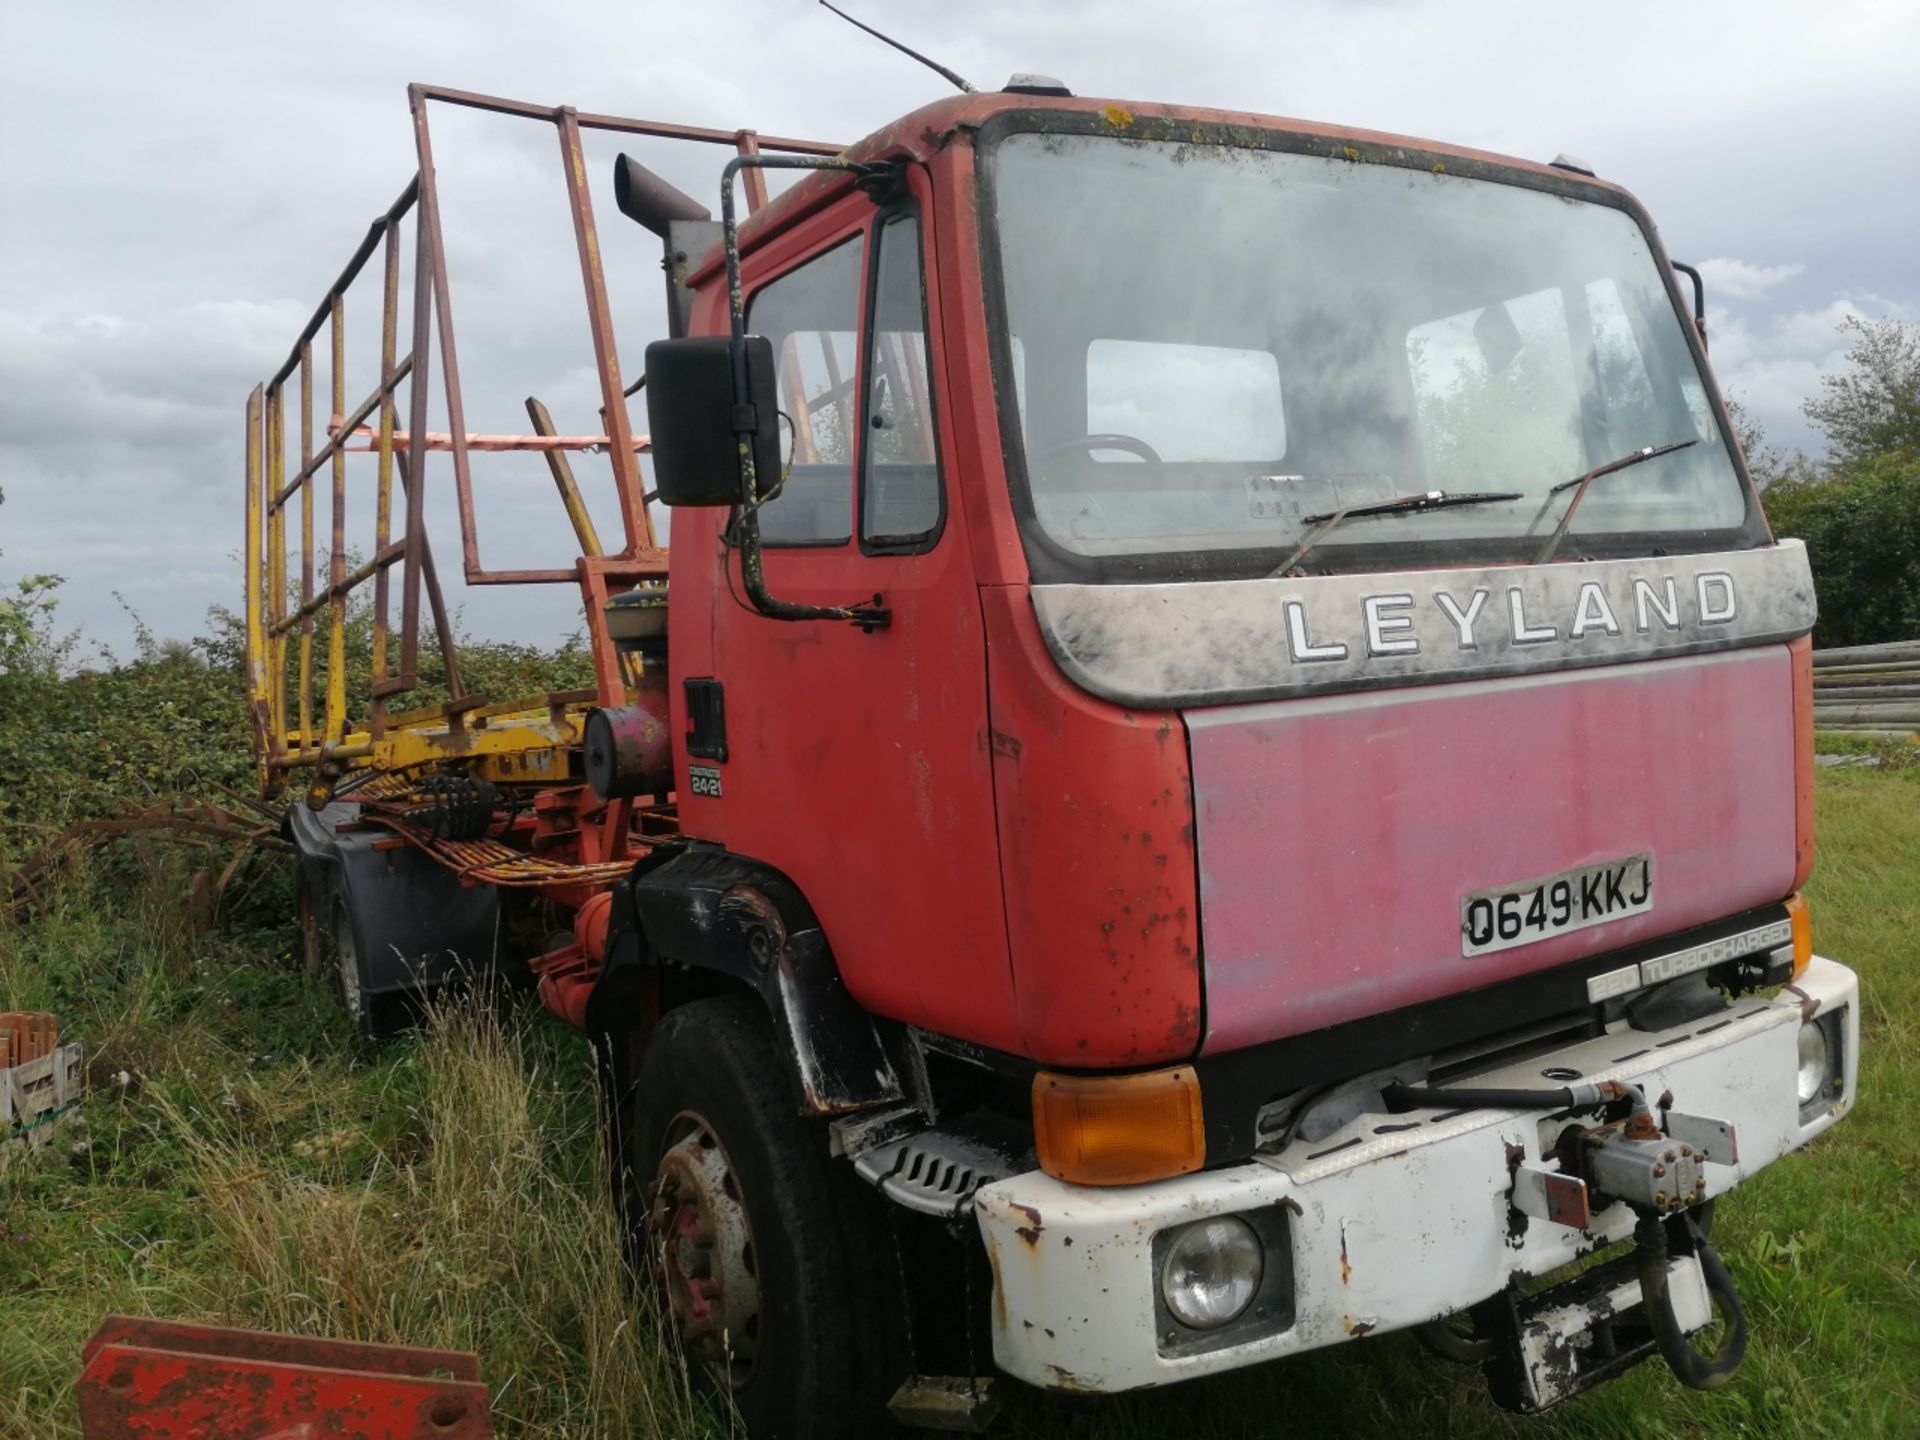 FULL AGRICULTURAL REGISTERED Leyland constructor bale chaser not limited use. From the mid 80s.